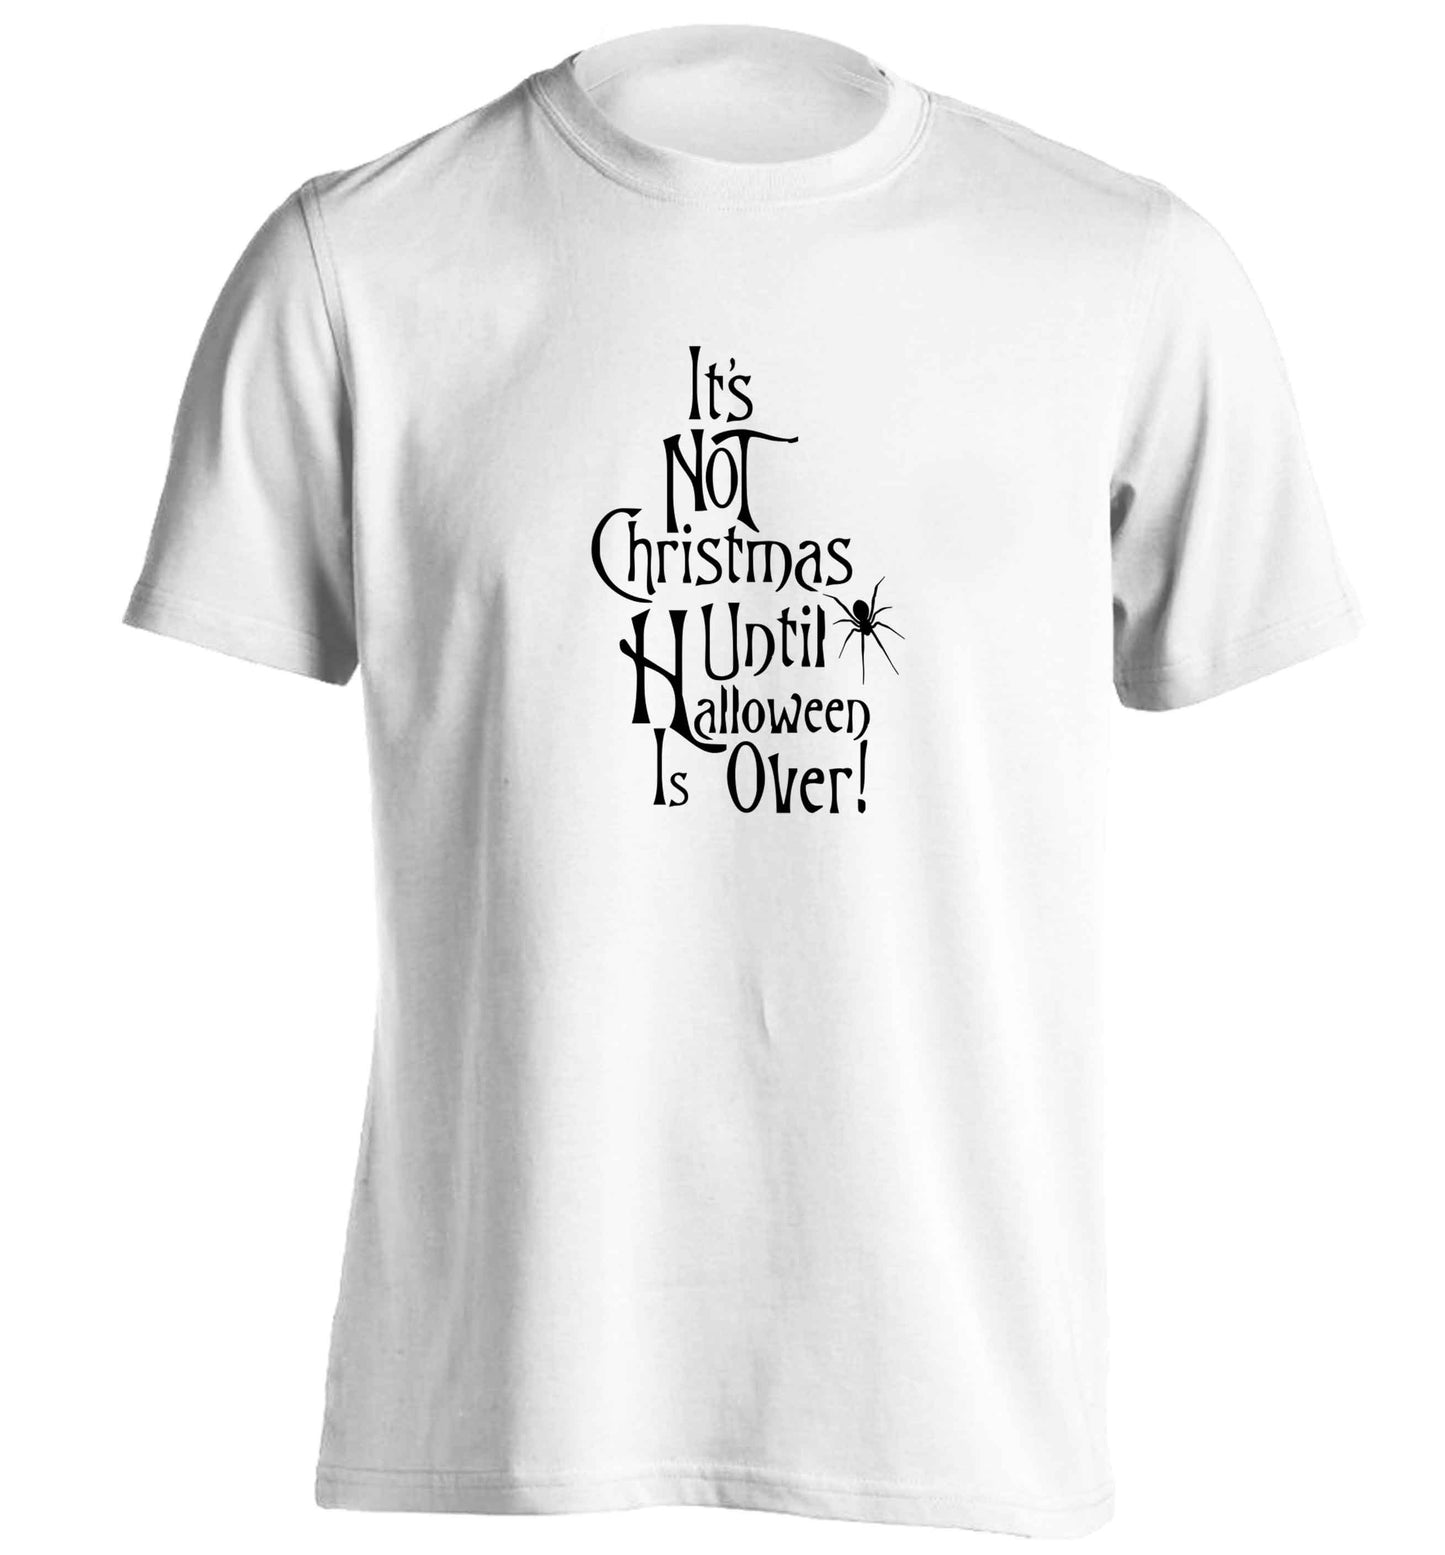 It's not Christmas until Halloween is over adults unisex white Tshirt 2XL